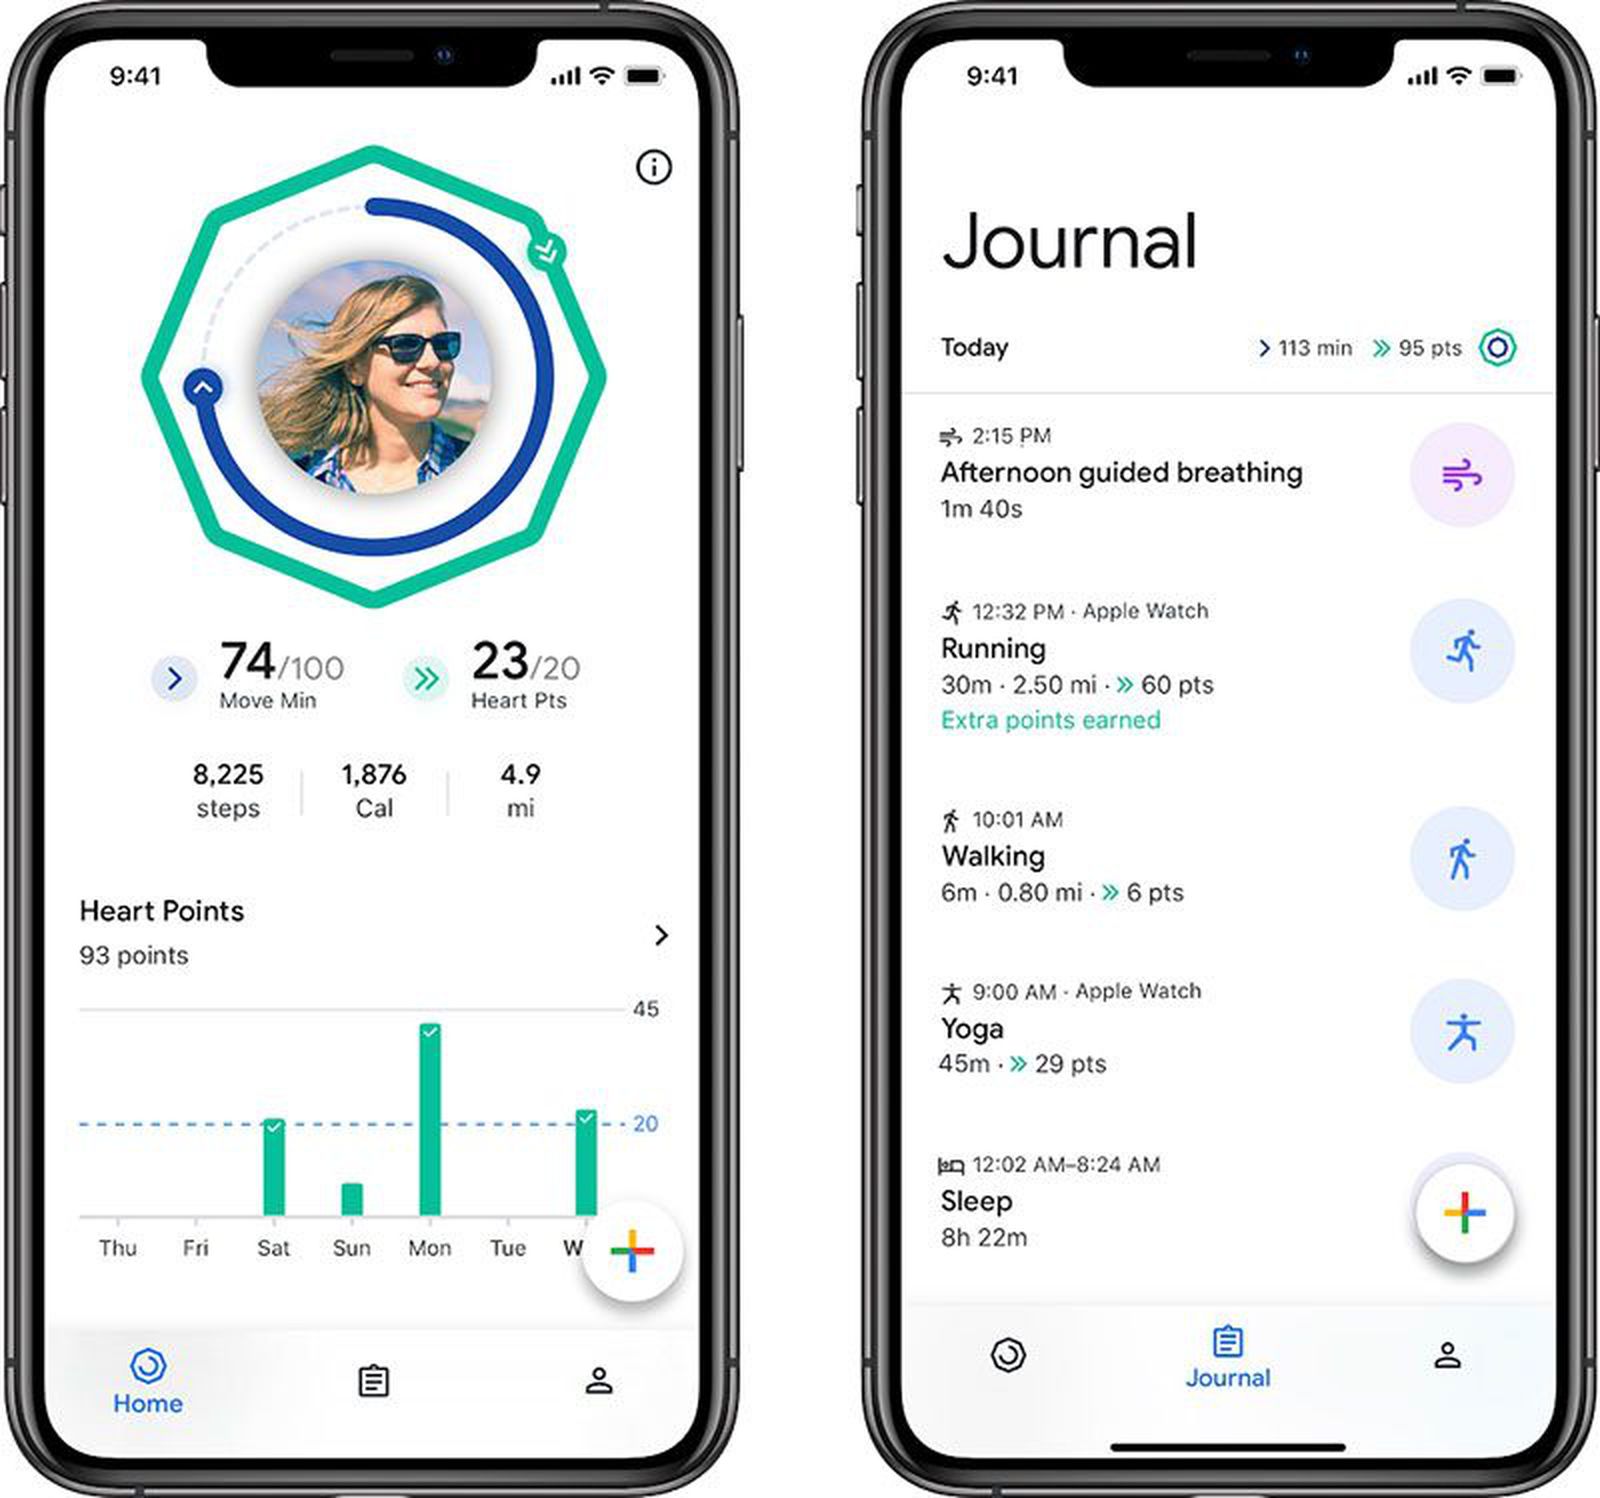 Google Fit is now available on iOS